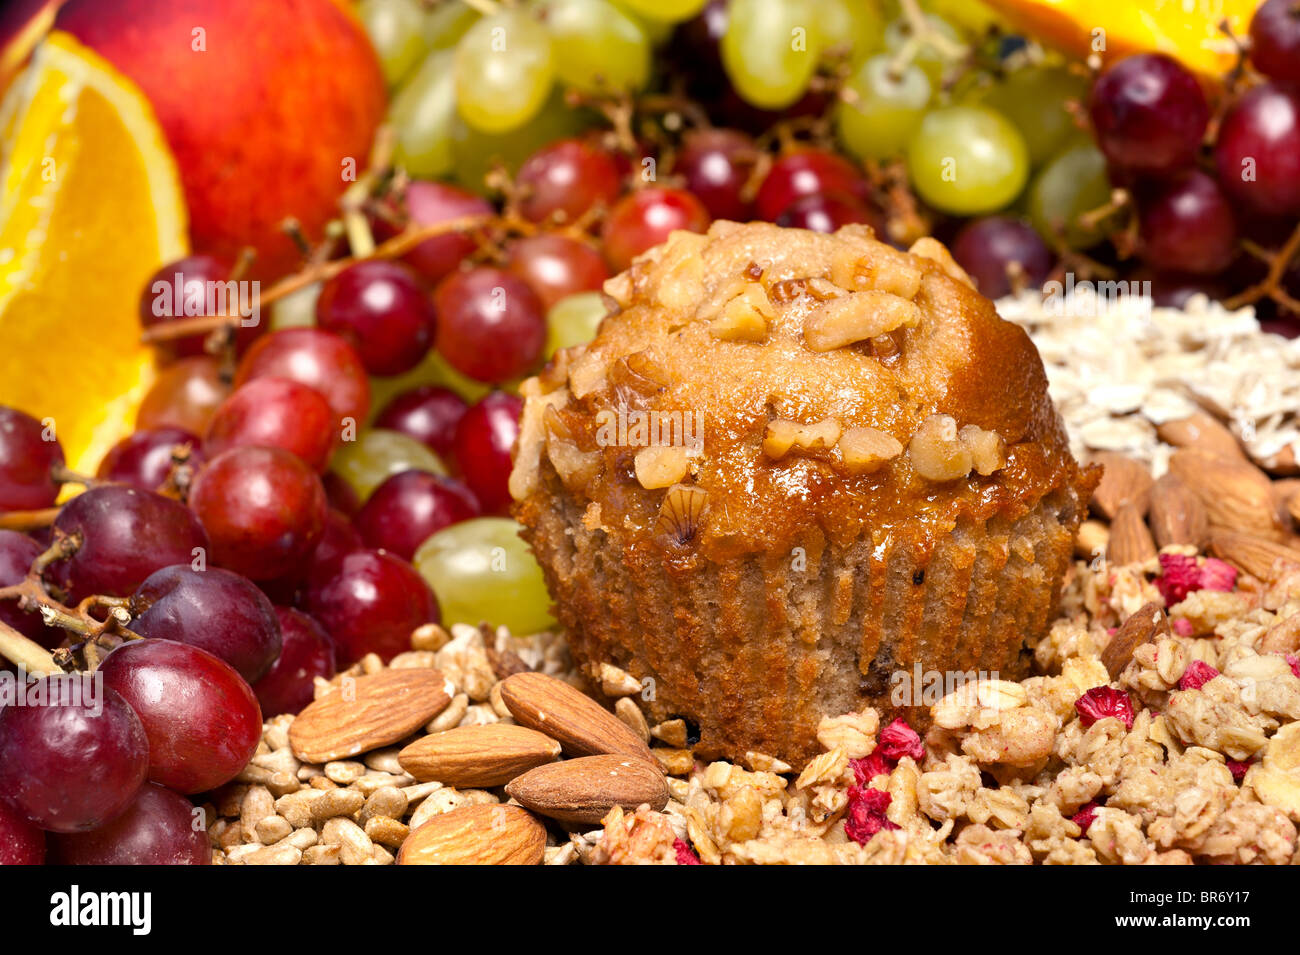 A breakfast setting of a freshly baked muffin with fruit and other condiments. Stock Photo